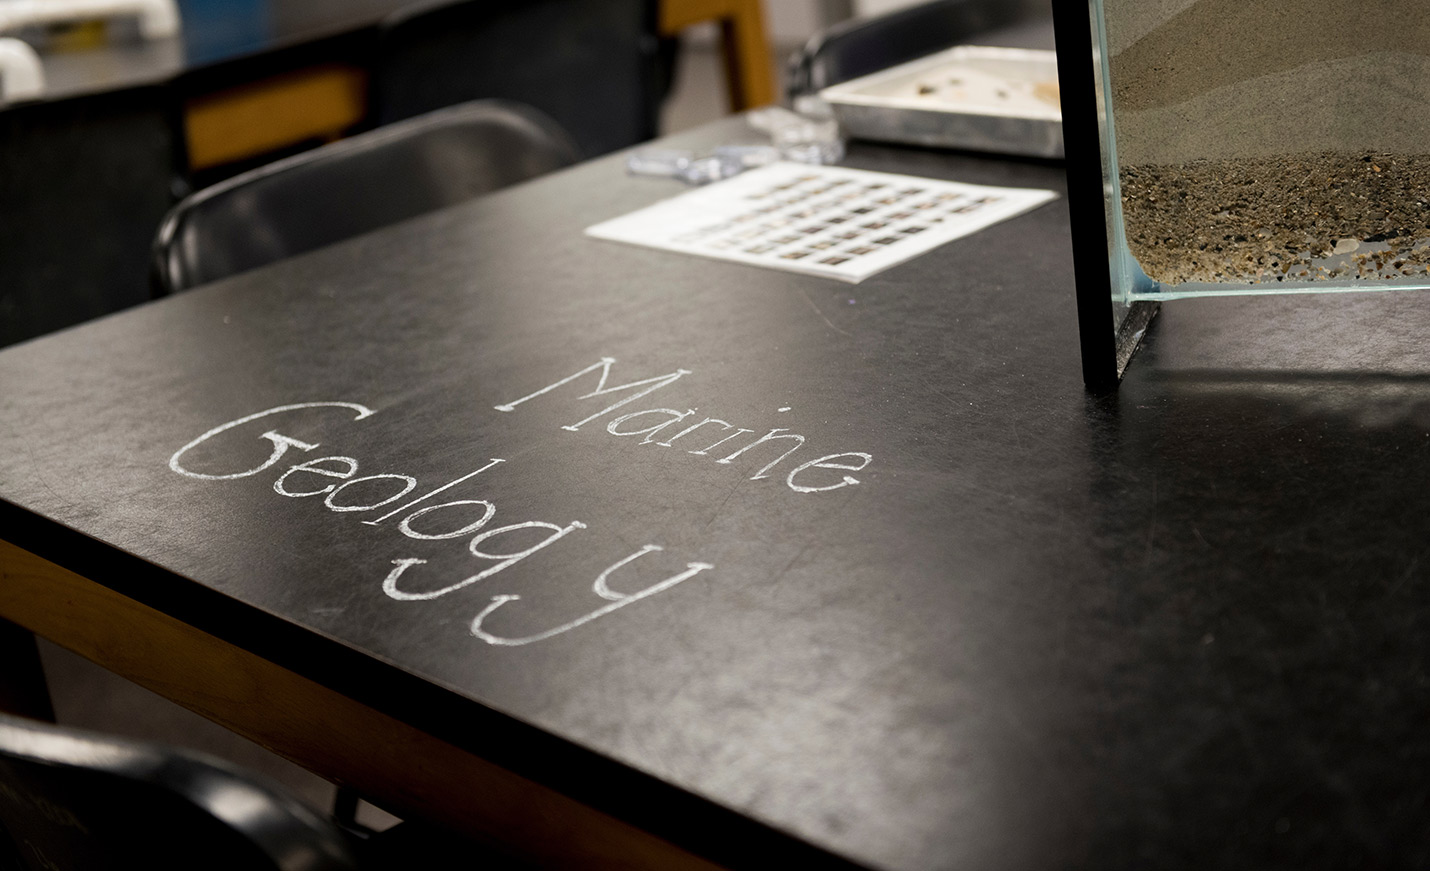 Closeup of writing on a table that says “Marine Geology”